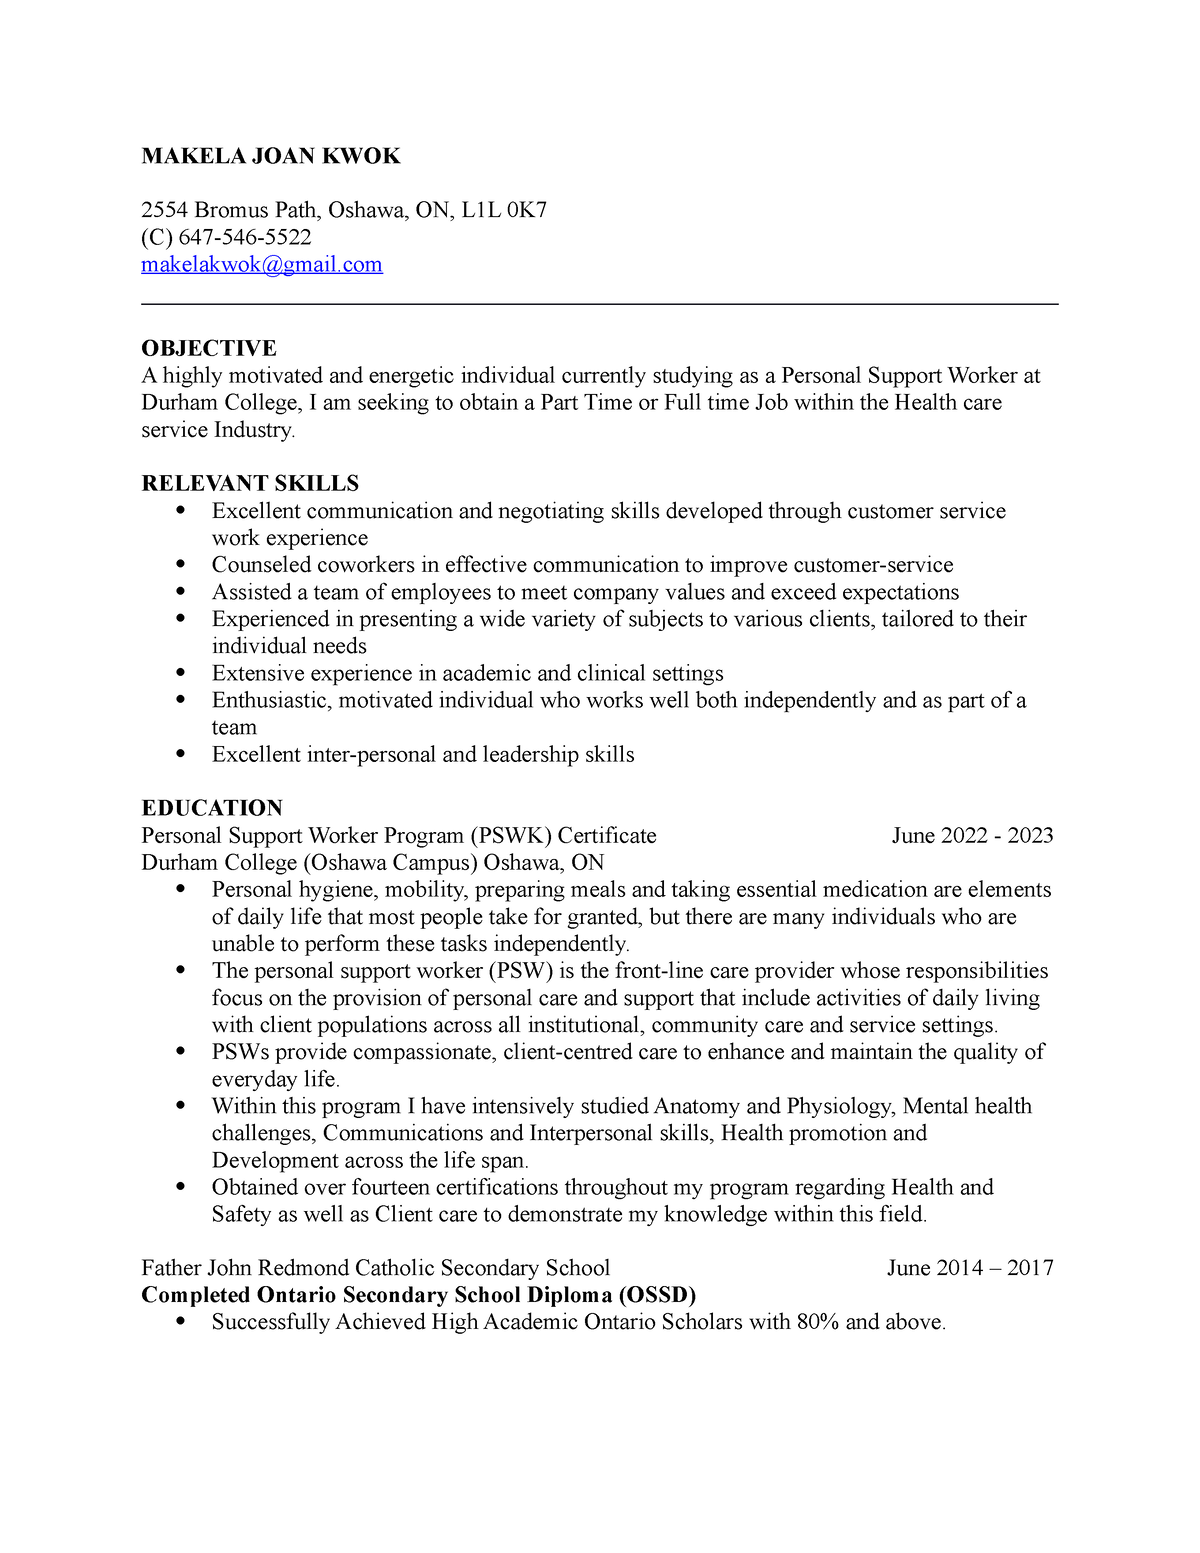 functional resume for psw